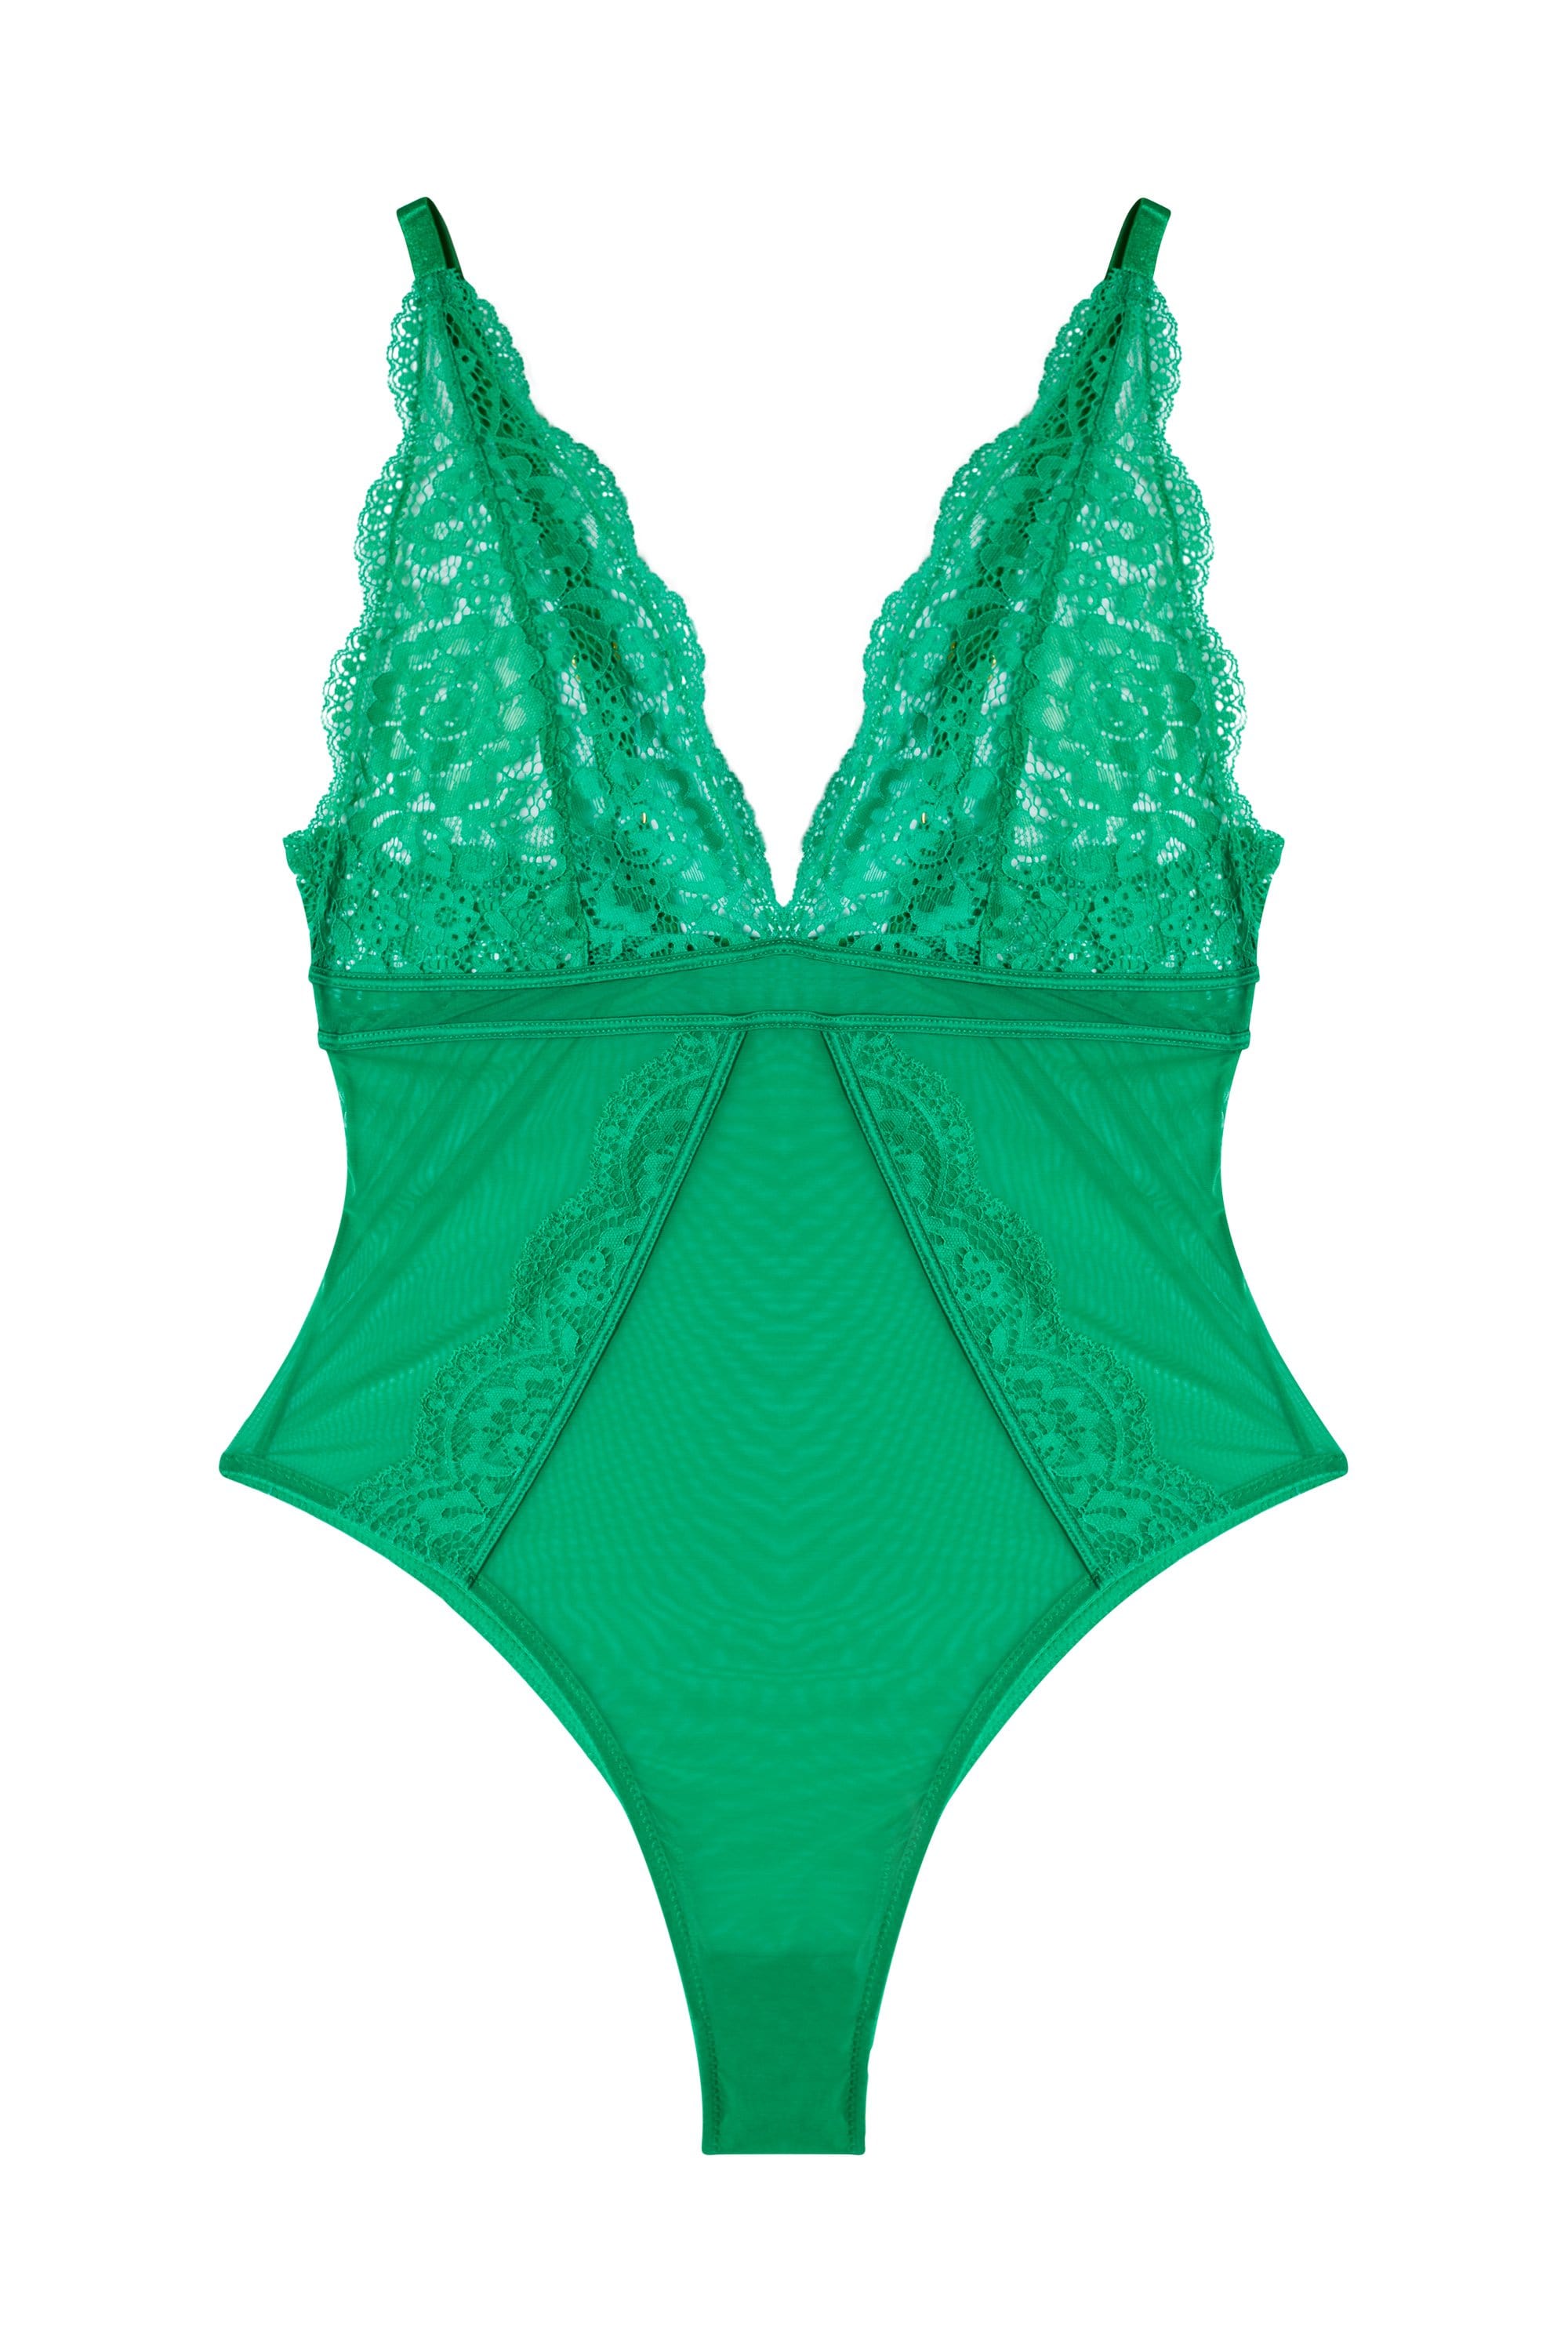 x PP Tinar Lace Green Body